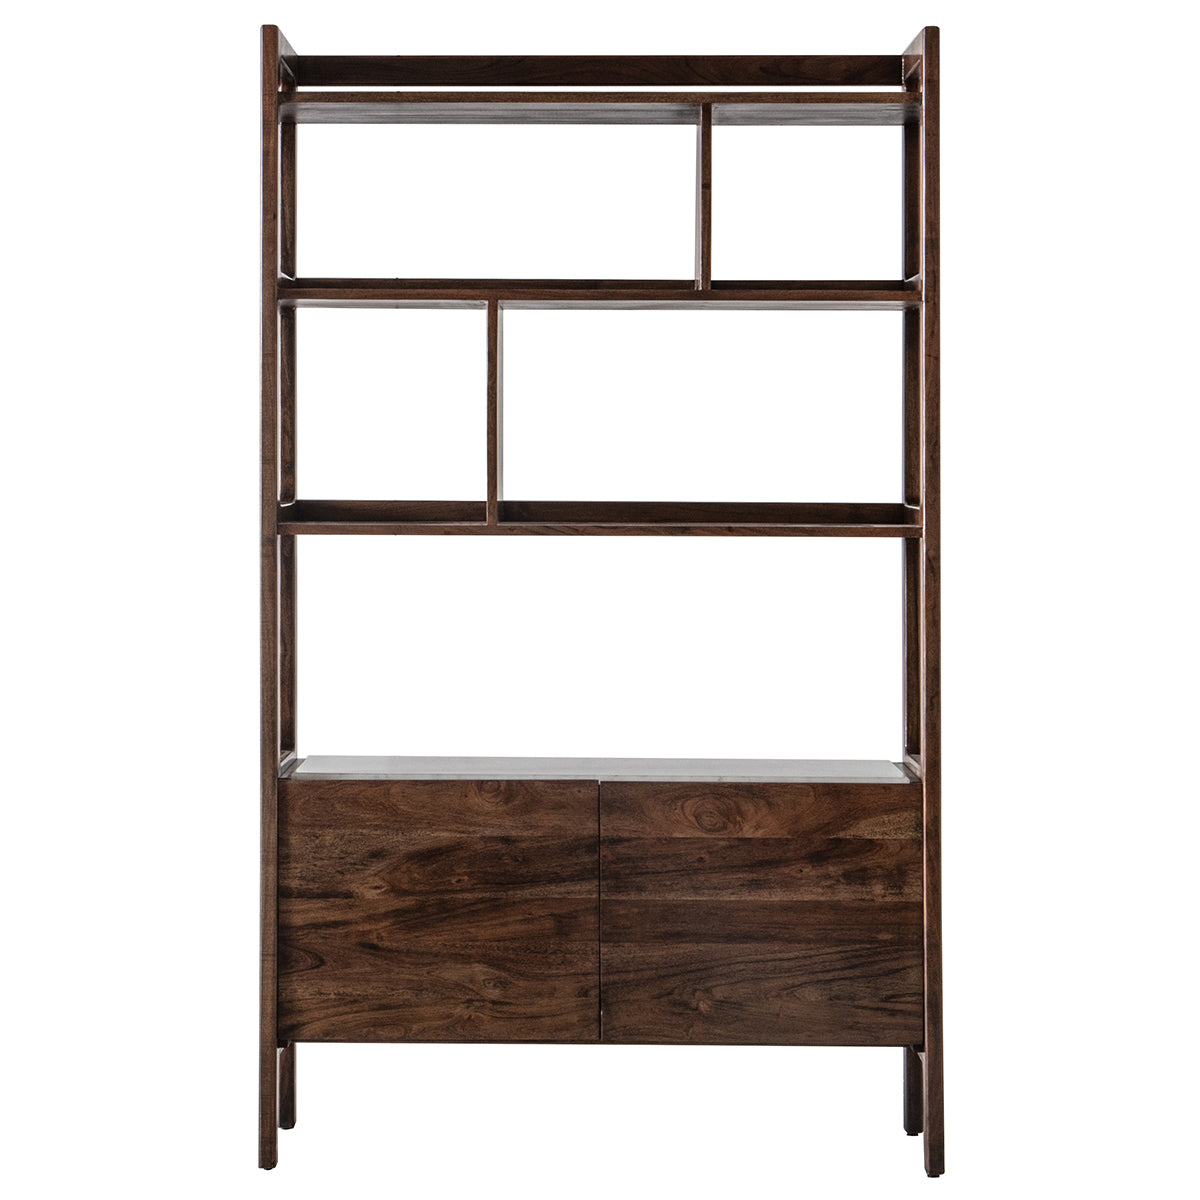 Wood and marble display unit with open and closed storage